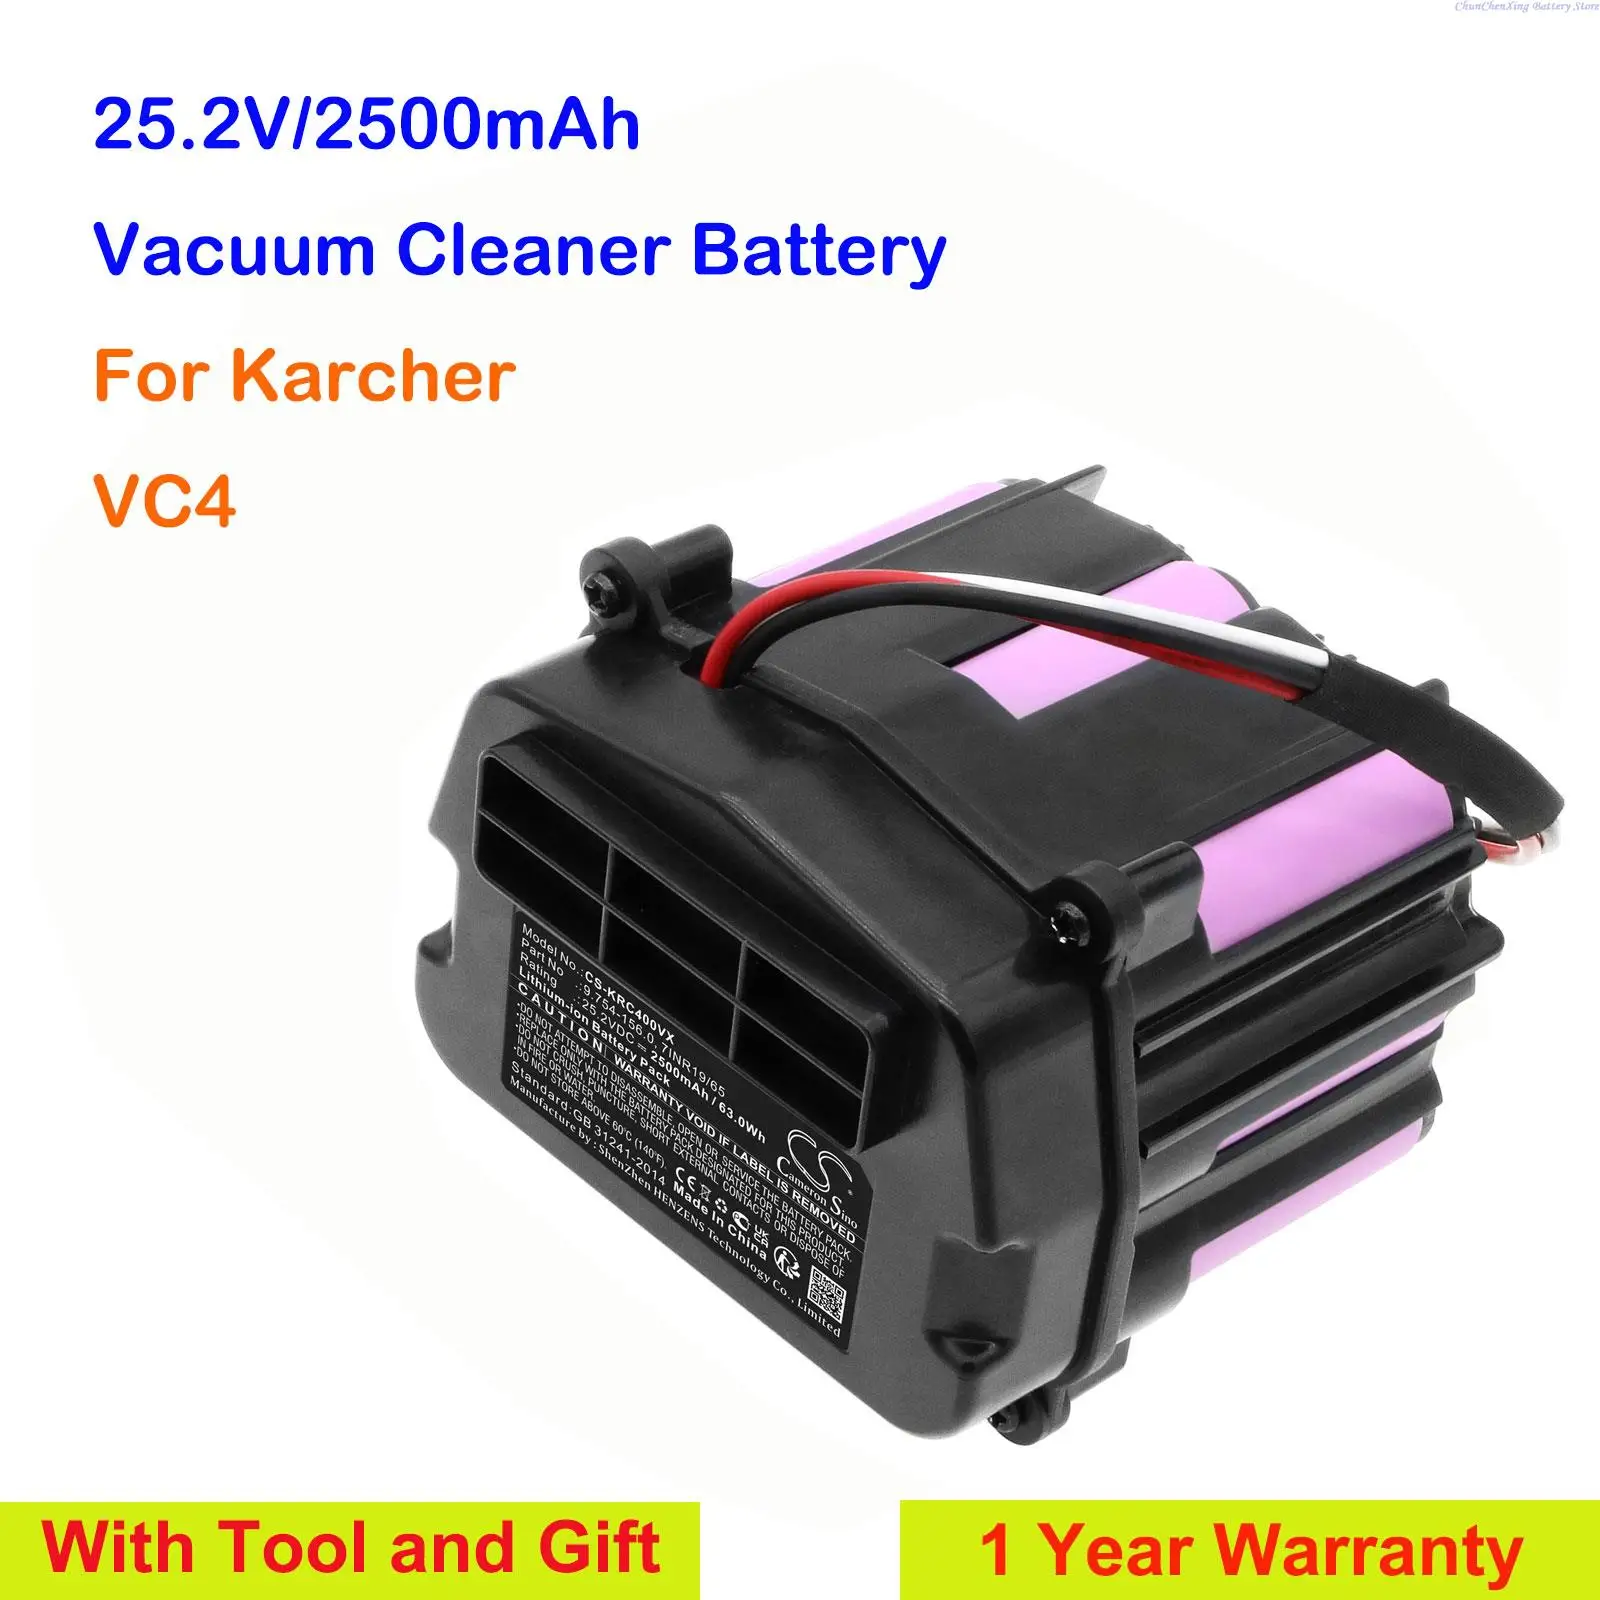 

CameronSino 2500mAh Vacuum Cleaner Battery 9.754-156.0, 7INR19/65 for Karcher VC4